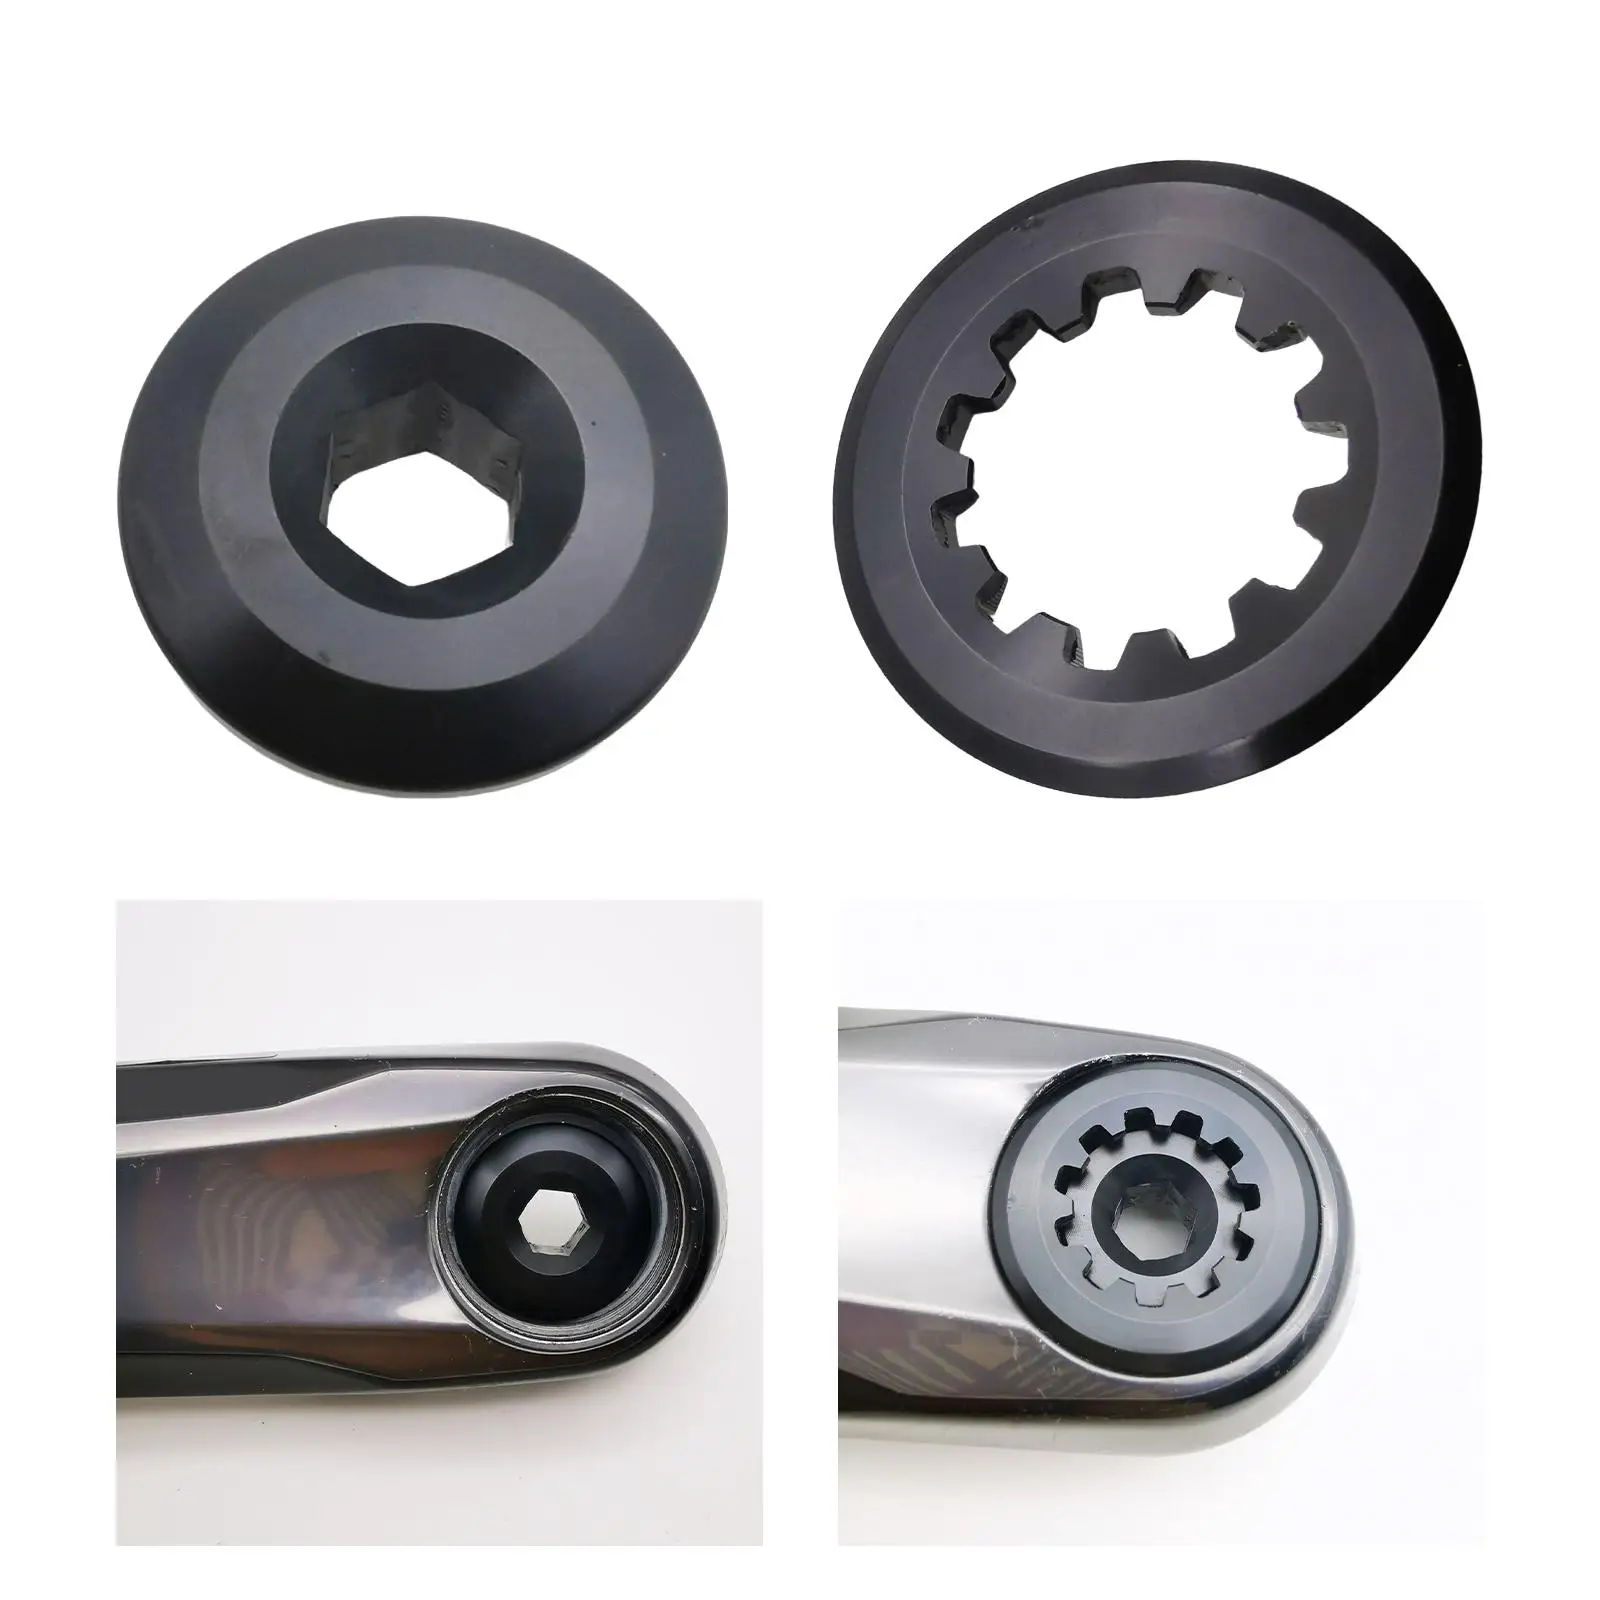 Professional Bicycle Crank Screw Crankset Bolt Bike Chainring Bolts Lightweight Durable Bike Crank Bolt for M9100 Cycling Parts